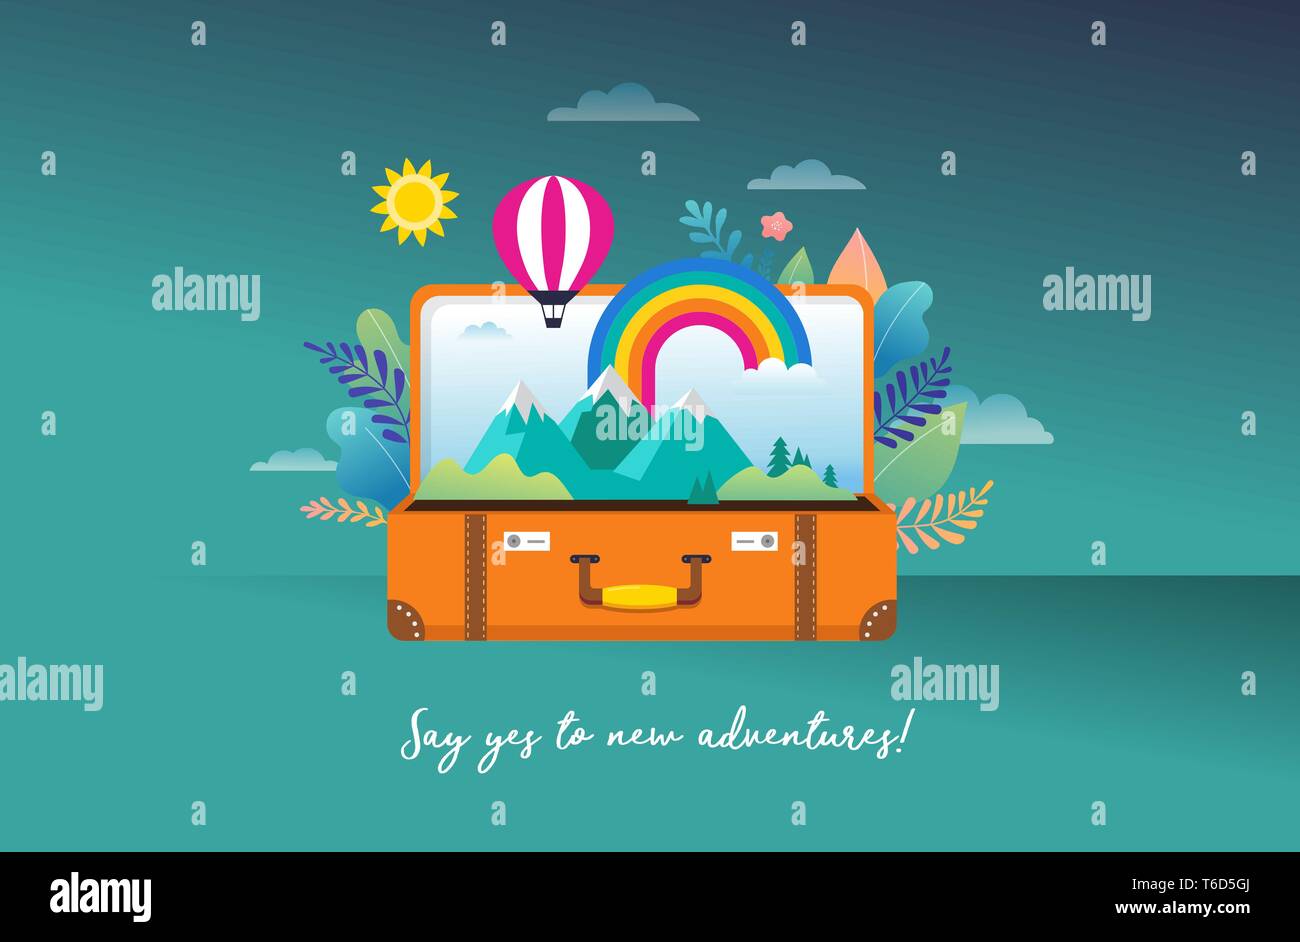 Travel, tourism, adventure scene with open suitcase, leaves, rainbow and miniature people, modern flat style. Vector illustration Stock Vector